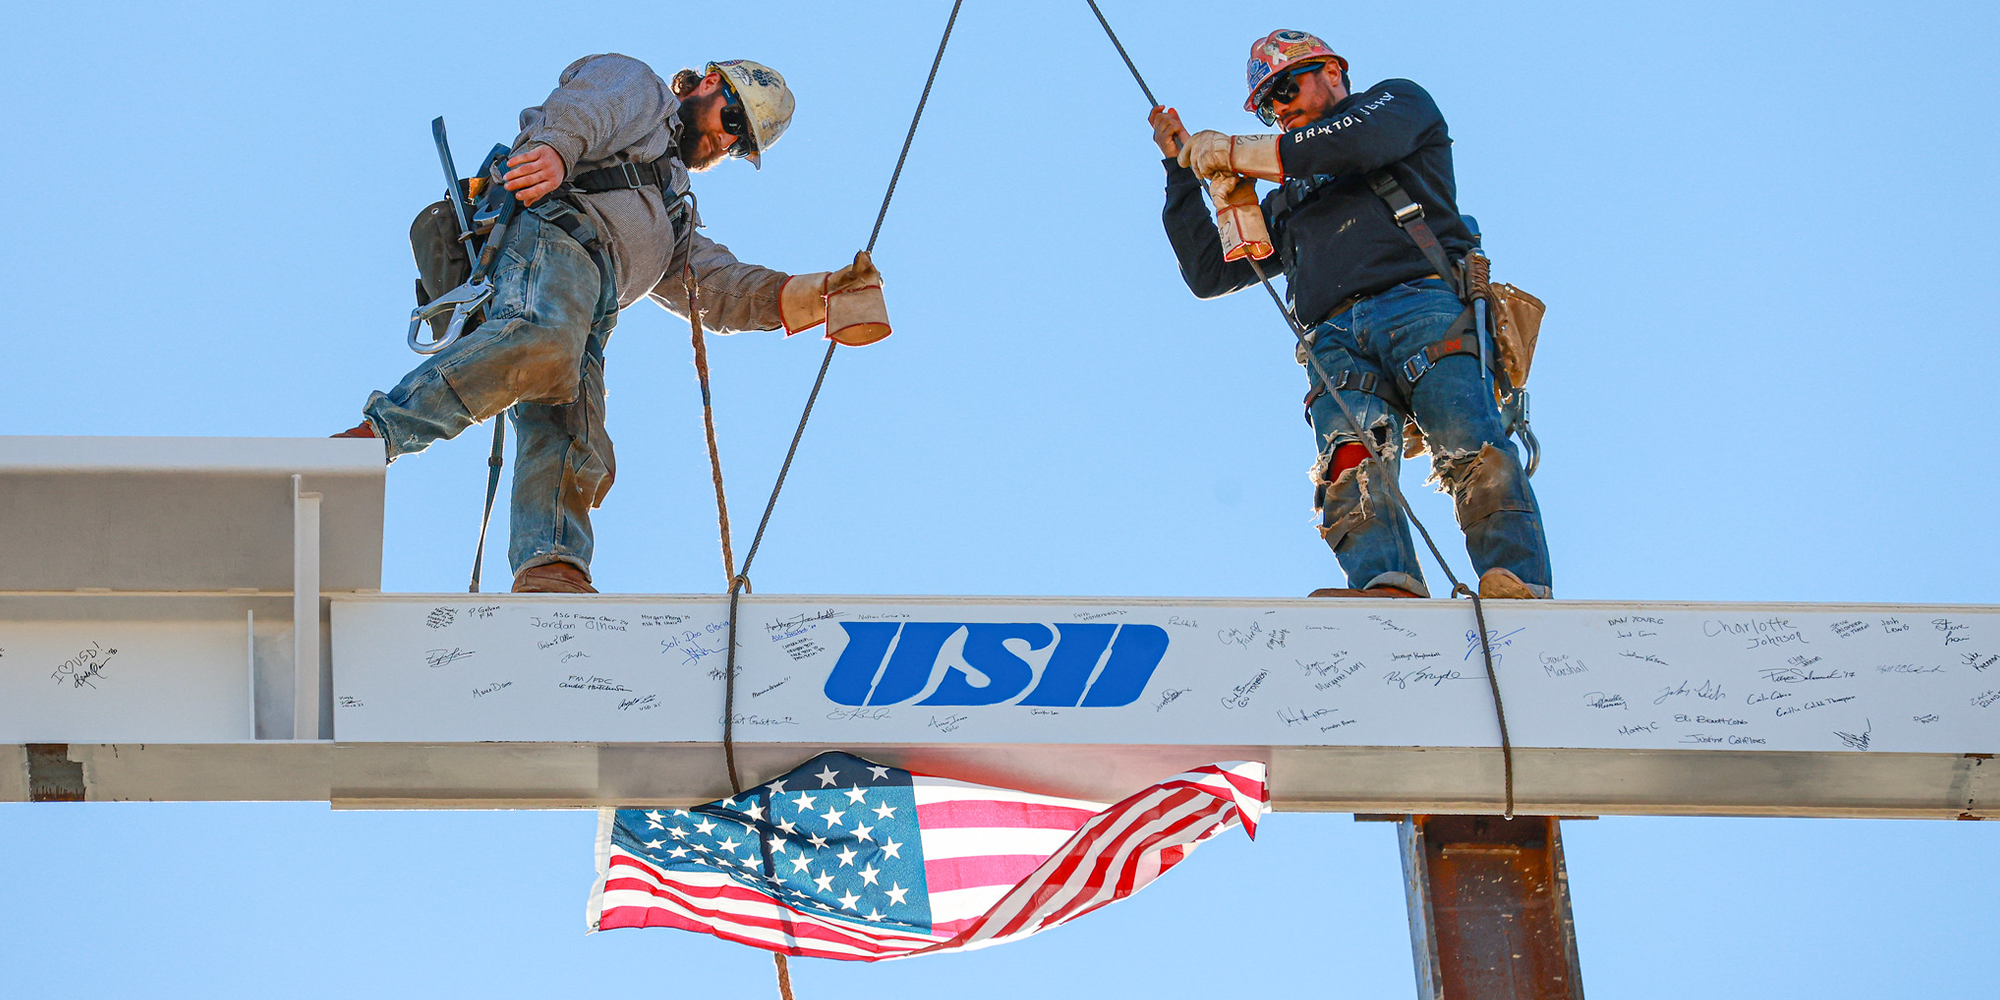 USD Ceremonial Topping Out Ceremony